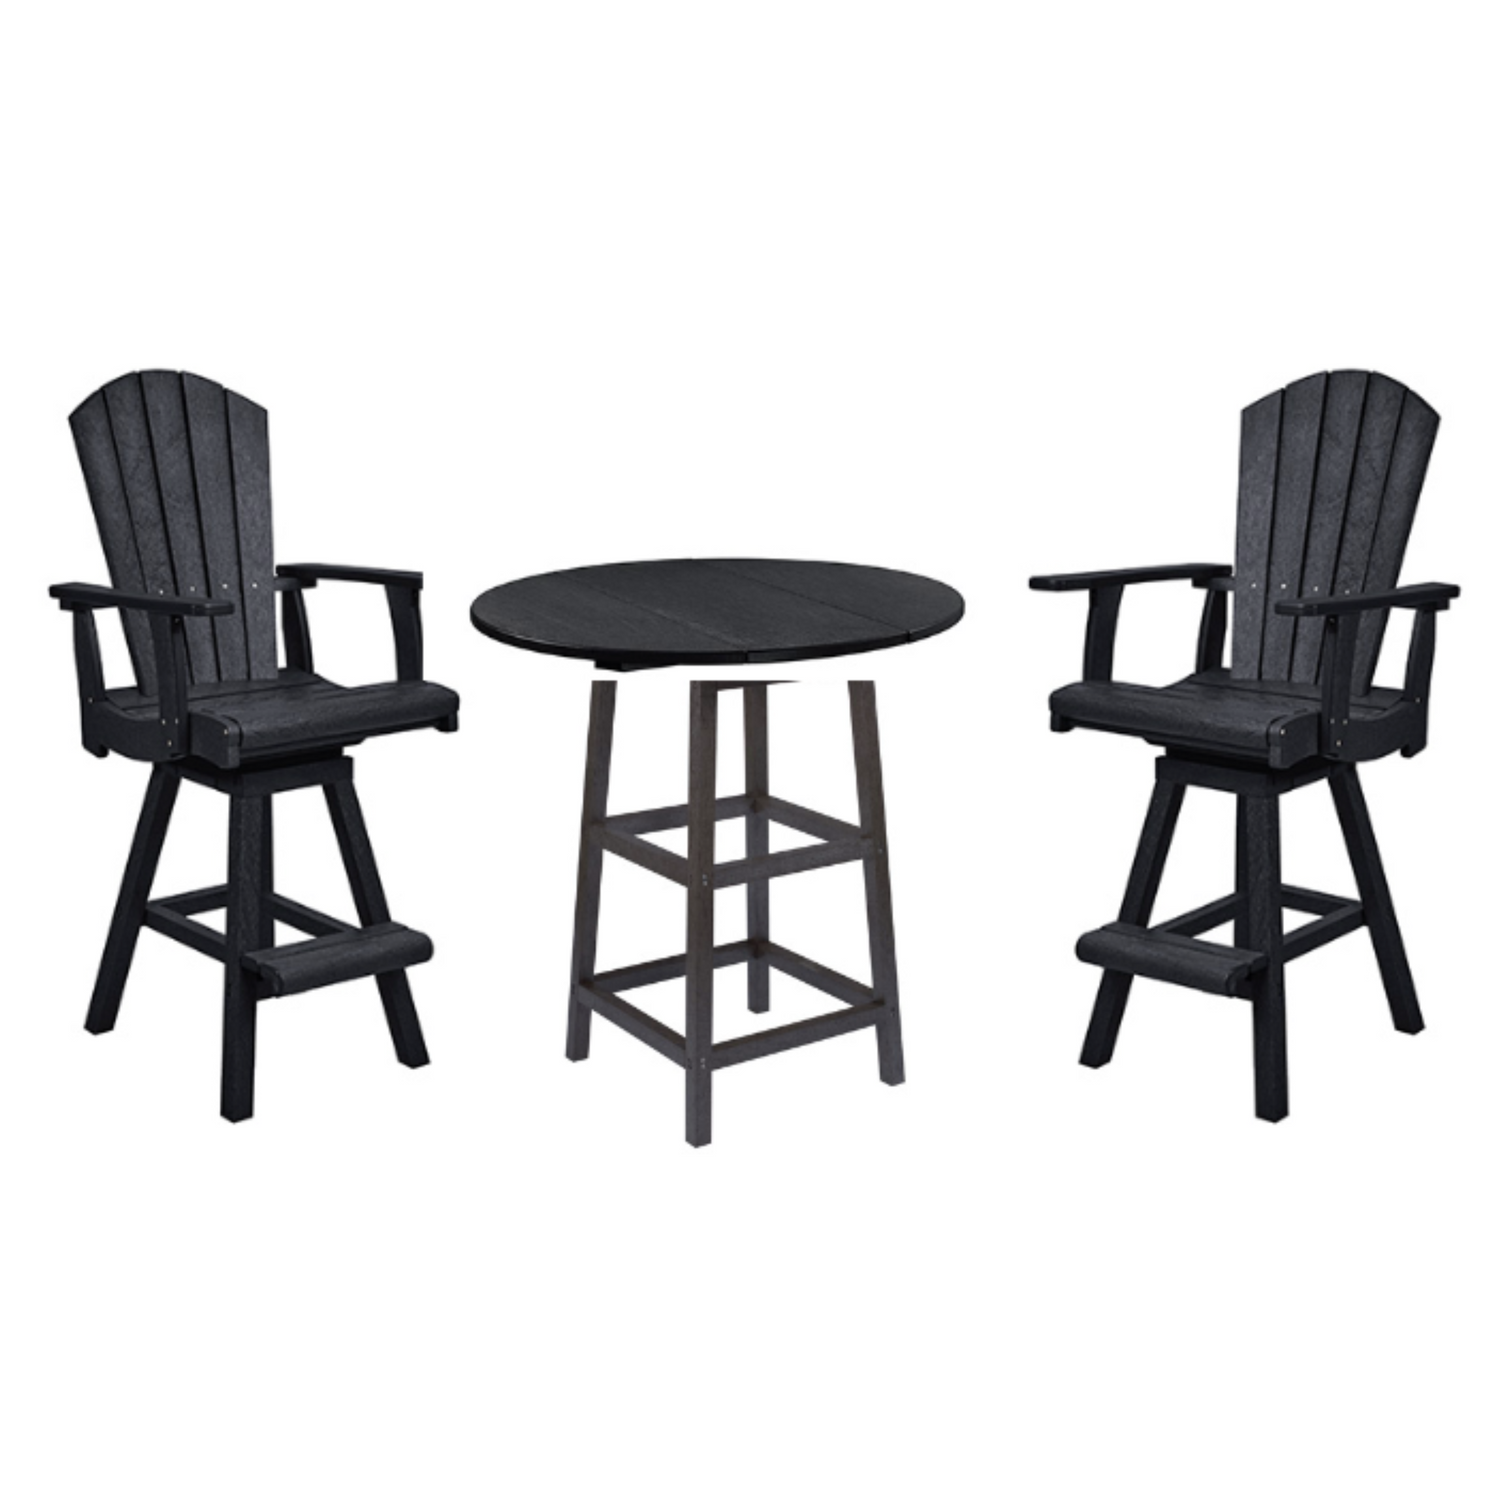 C.R.P. Swivel Patio Set in frame colour black with table and swivel chairs